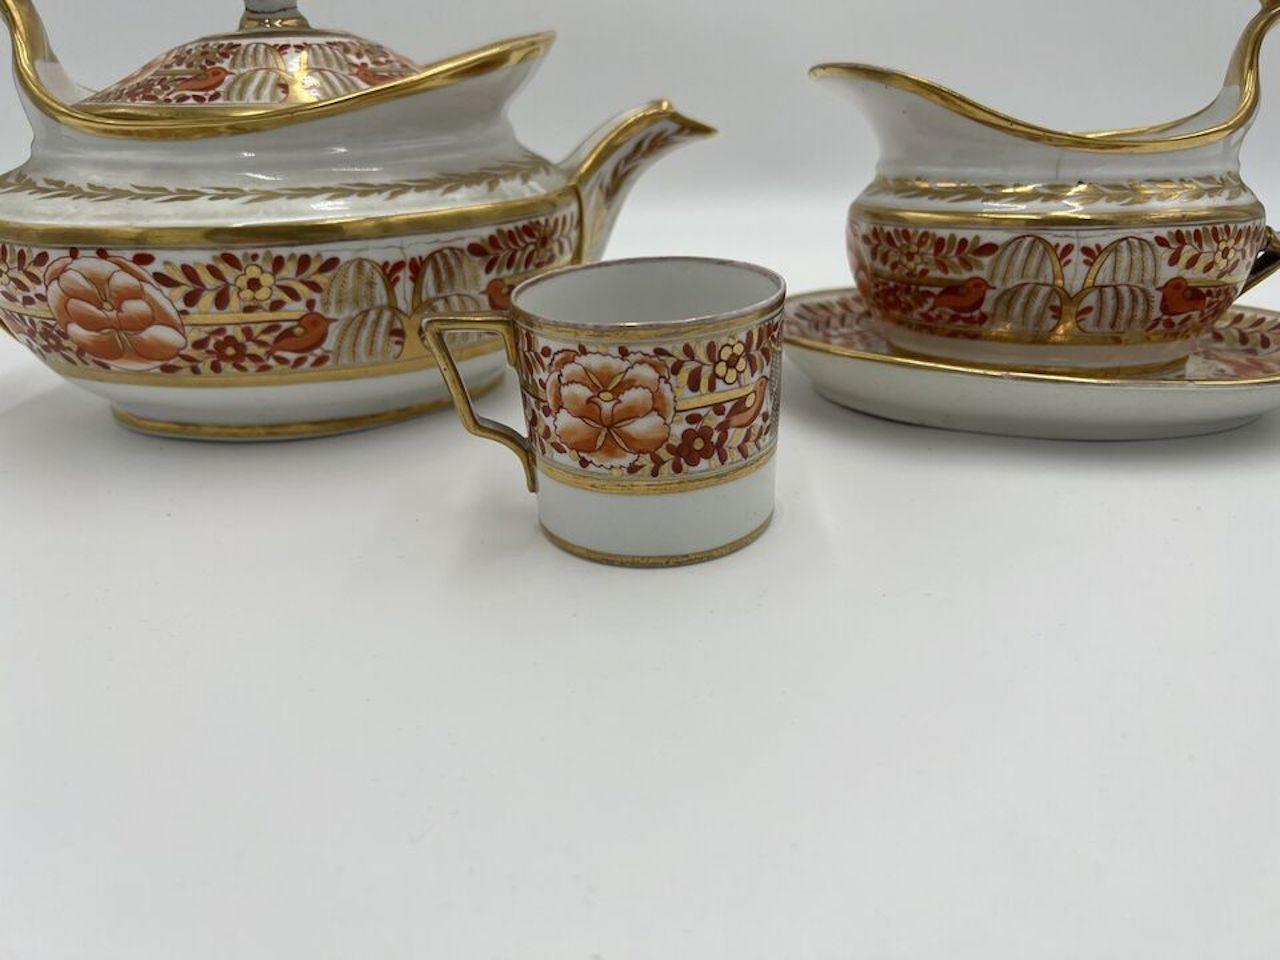 Spode (English, founded 1770), circa 1820. An extremely fine quality and rare personal tea service in rust and gold. The surfaces are decorated in an imari style pallet - laurel leaf banding, trees of plenty and birds. Included is a large teapot,